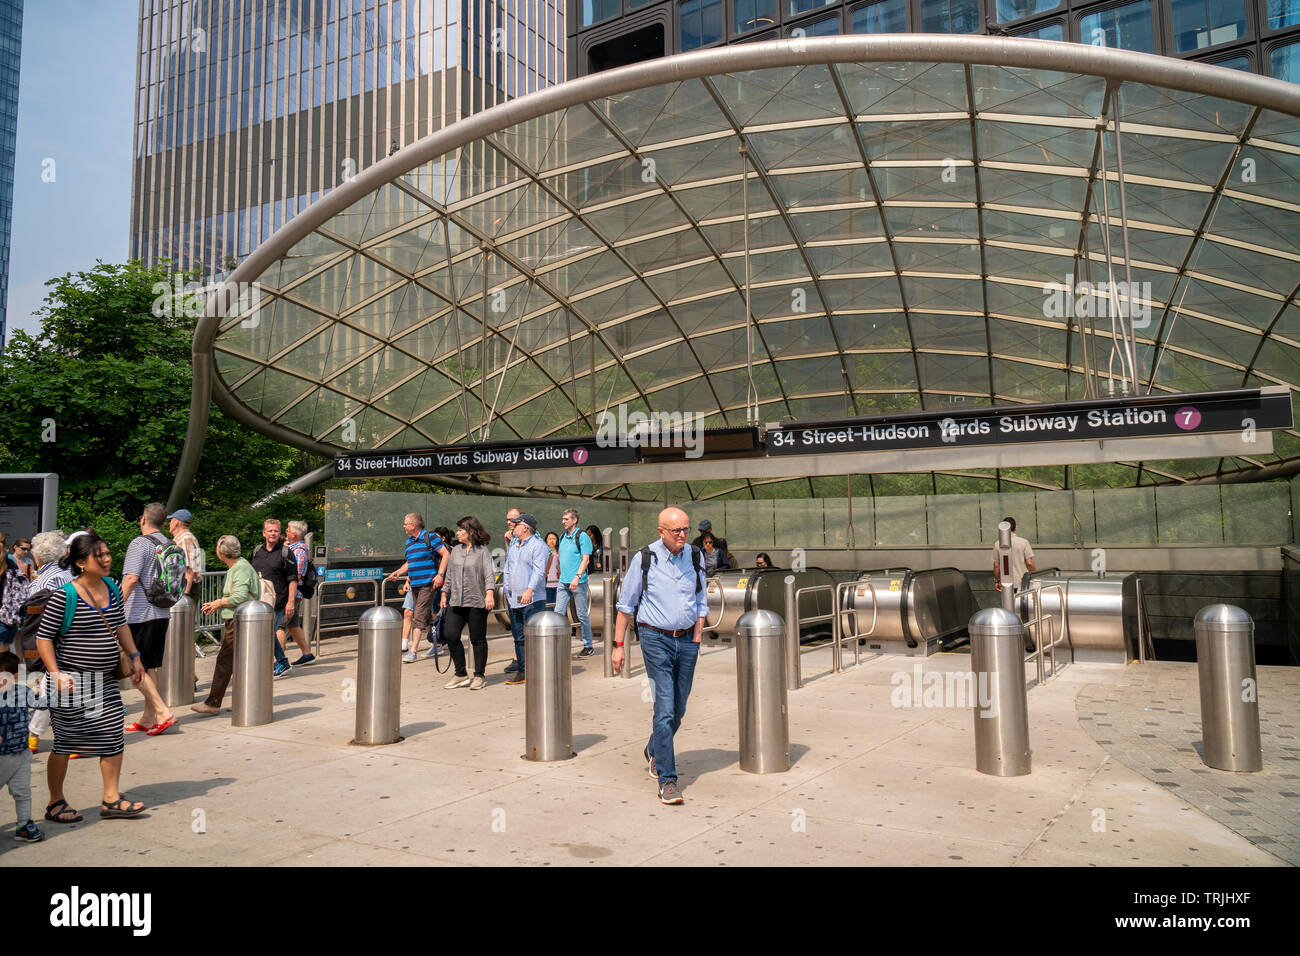 The 34th Street-Hudson Yards terminal on the 7 Subway line extension in New York disgorges hordes of tourist on their way to Hudson Yards on Sunday, June 2, 2019. (© Richard B. Levine) Stock Photo